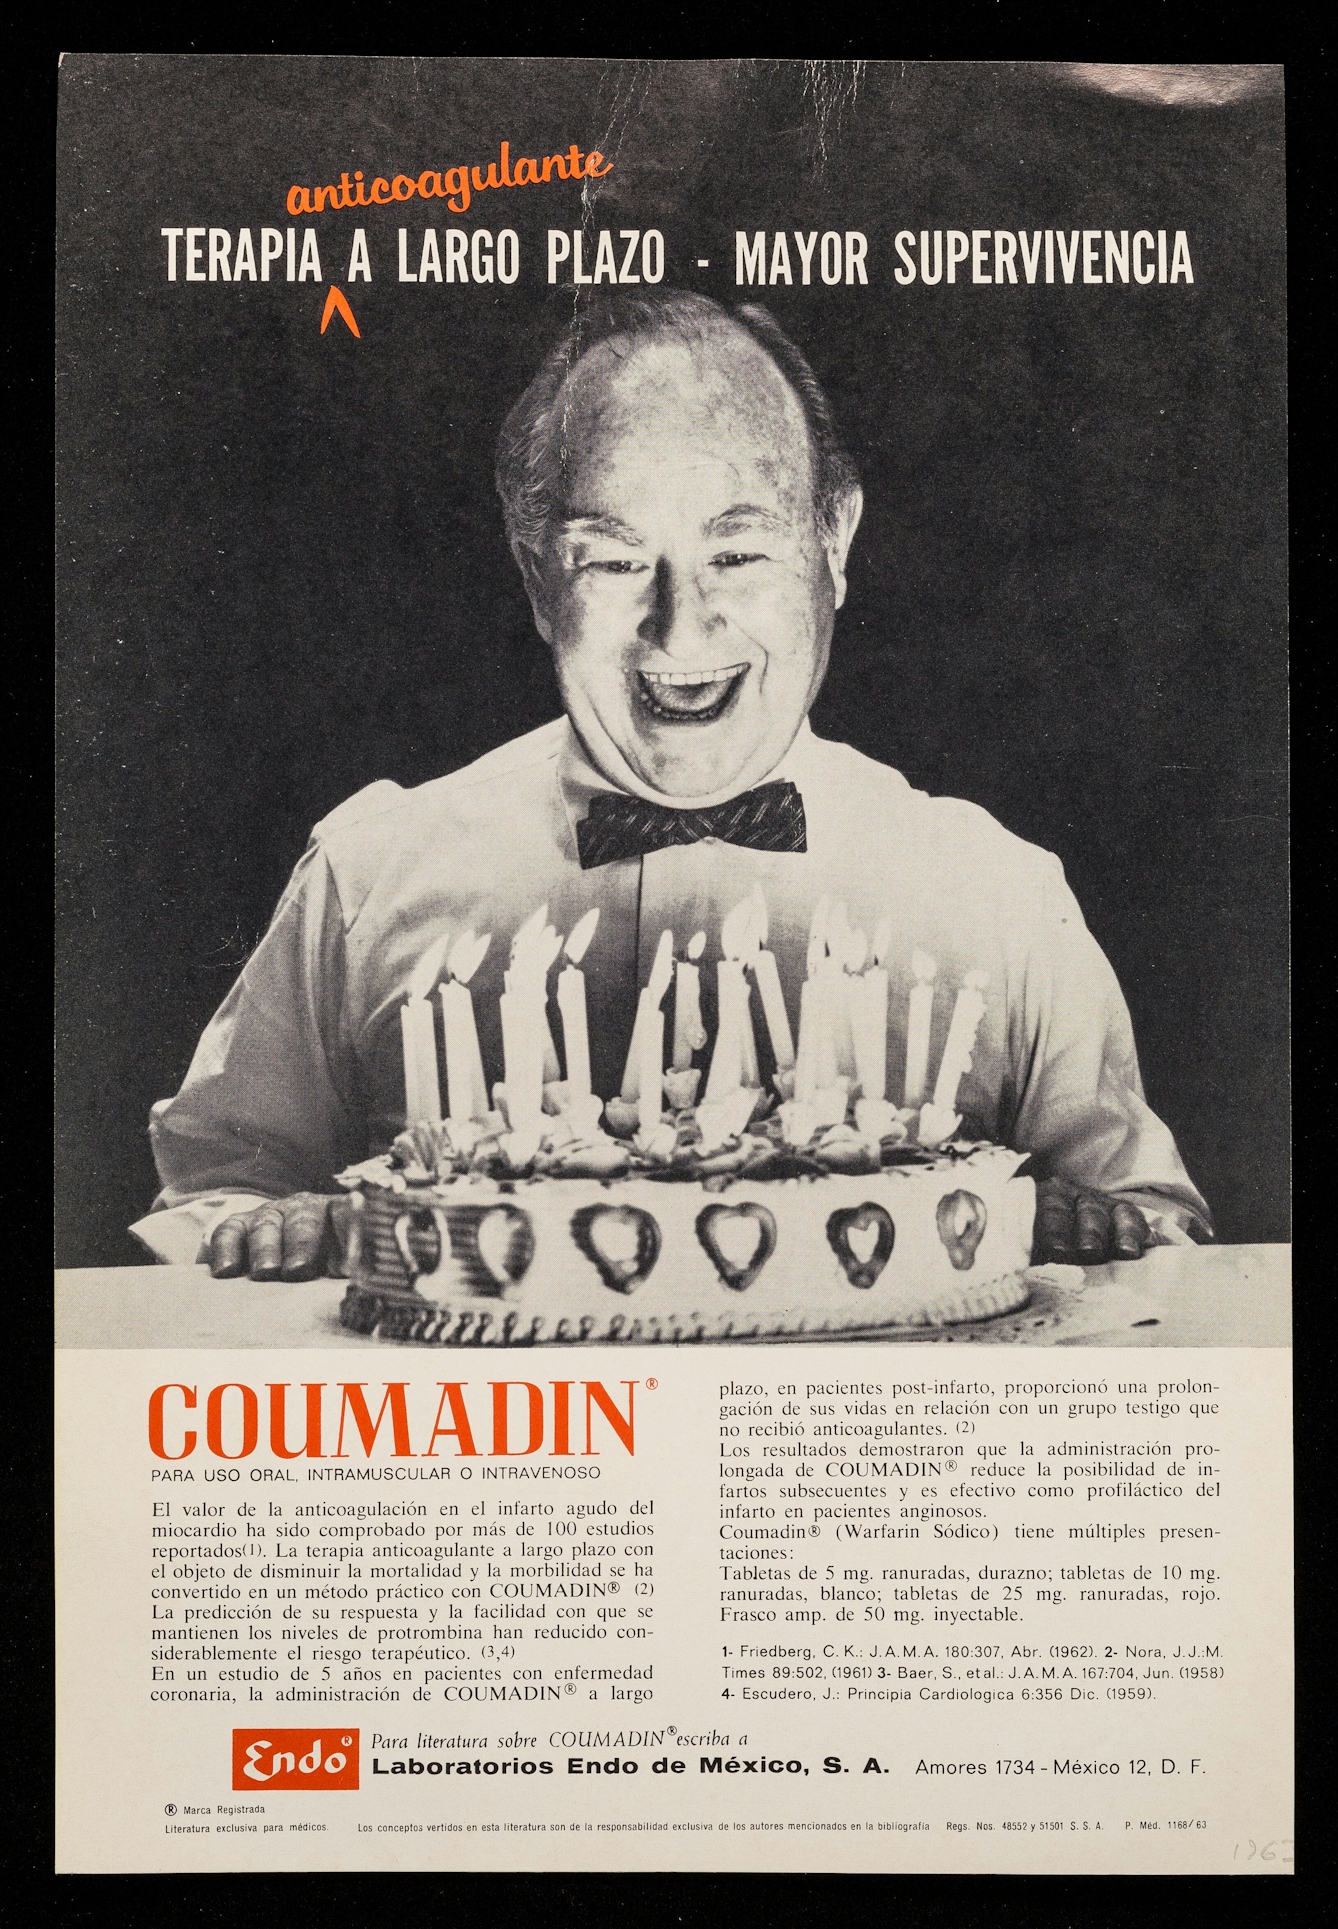 1960s Mexican magazine advertisement. The image shows an older man wearing a bowtie smiling at a birthday cake covered in candles. The cake is decorated with heart shaped piping. There is text below and above the image. 
